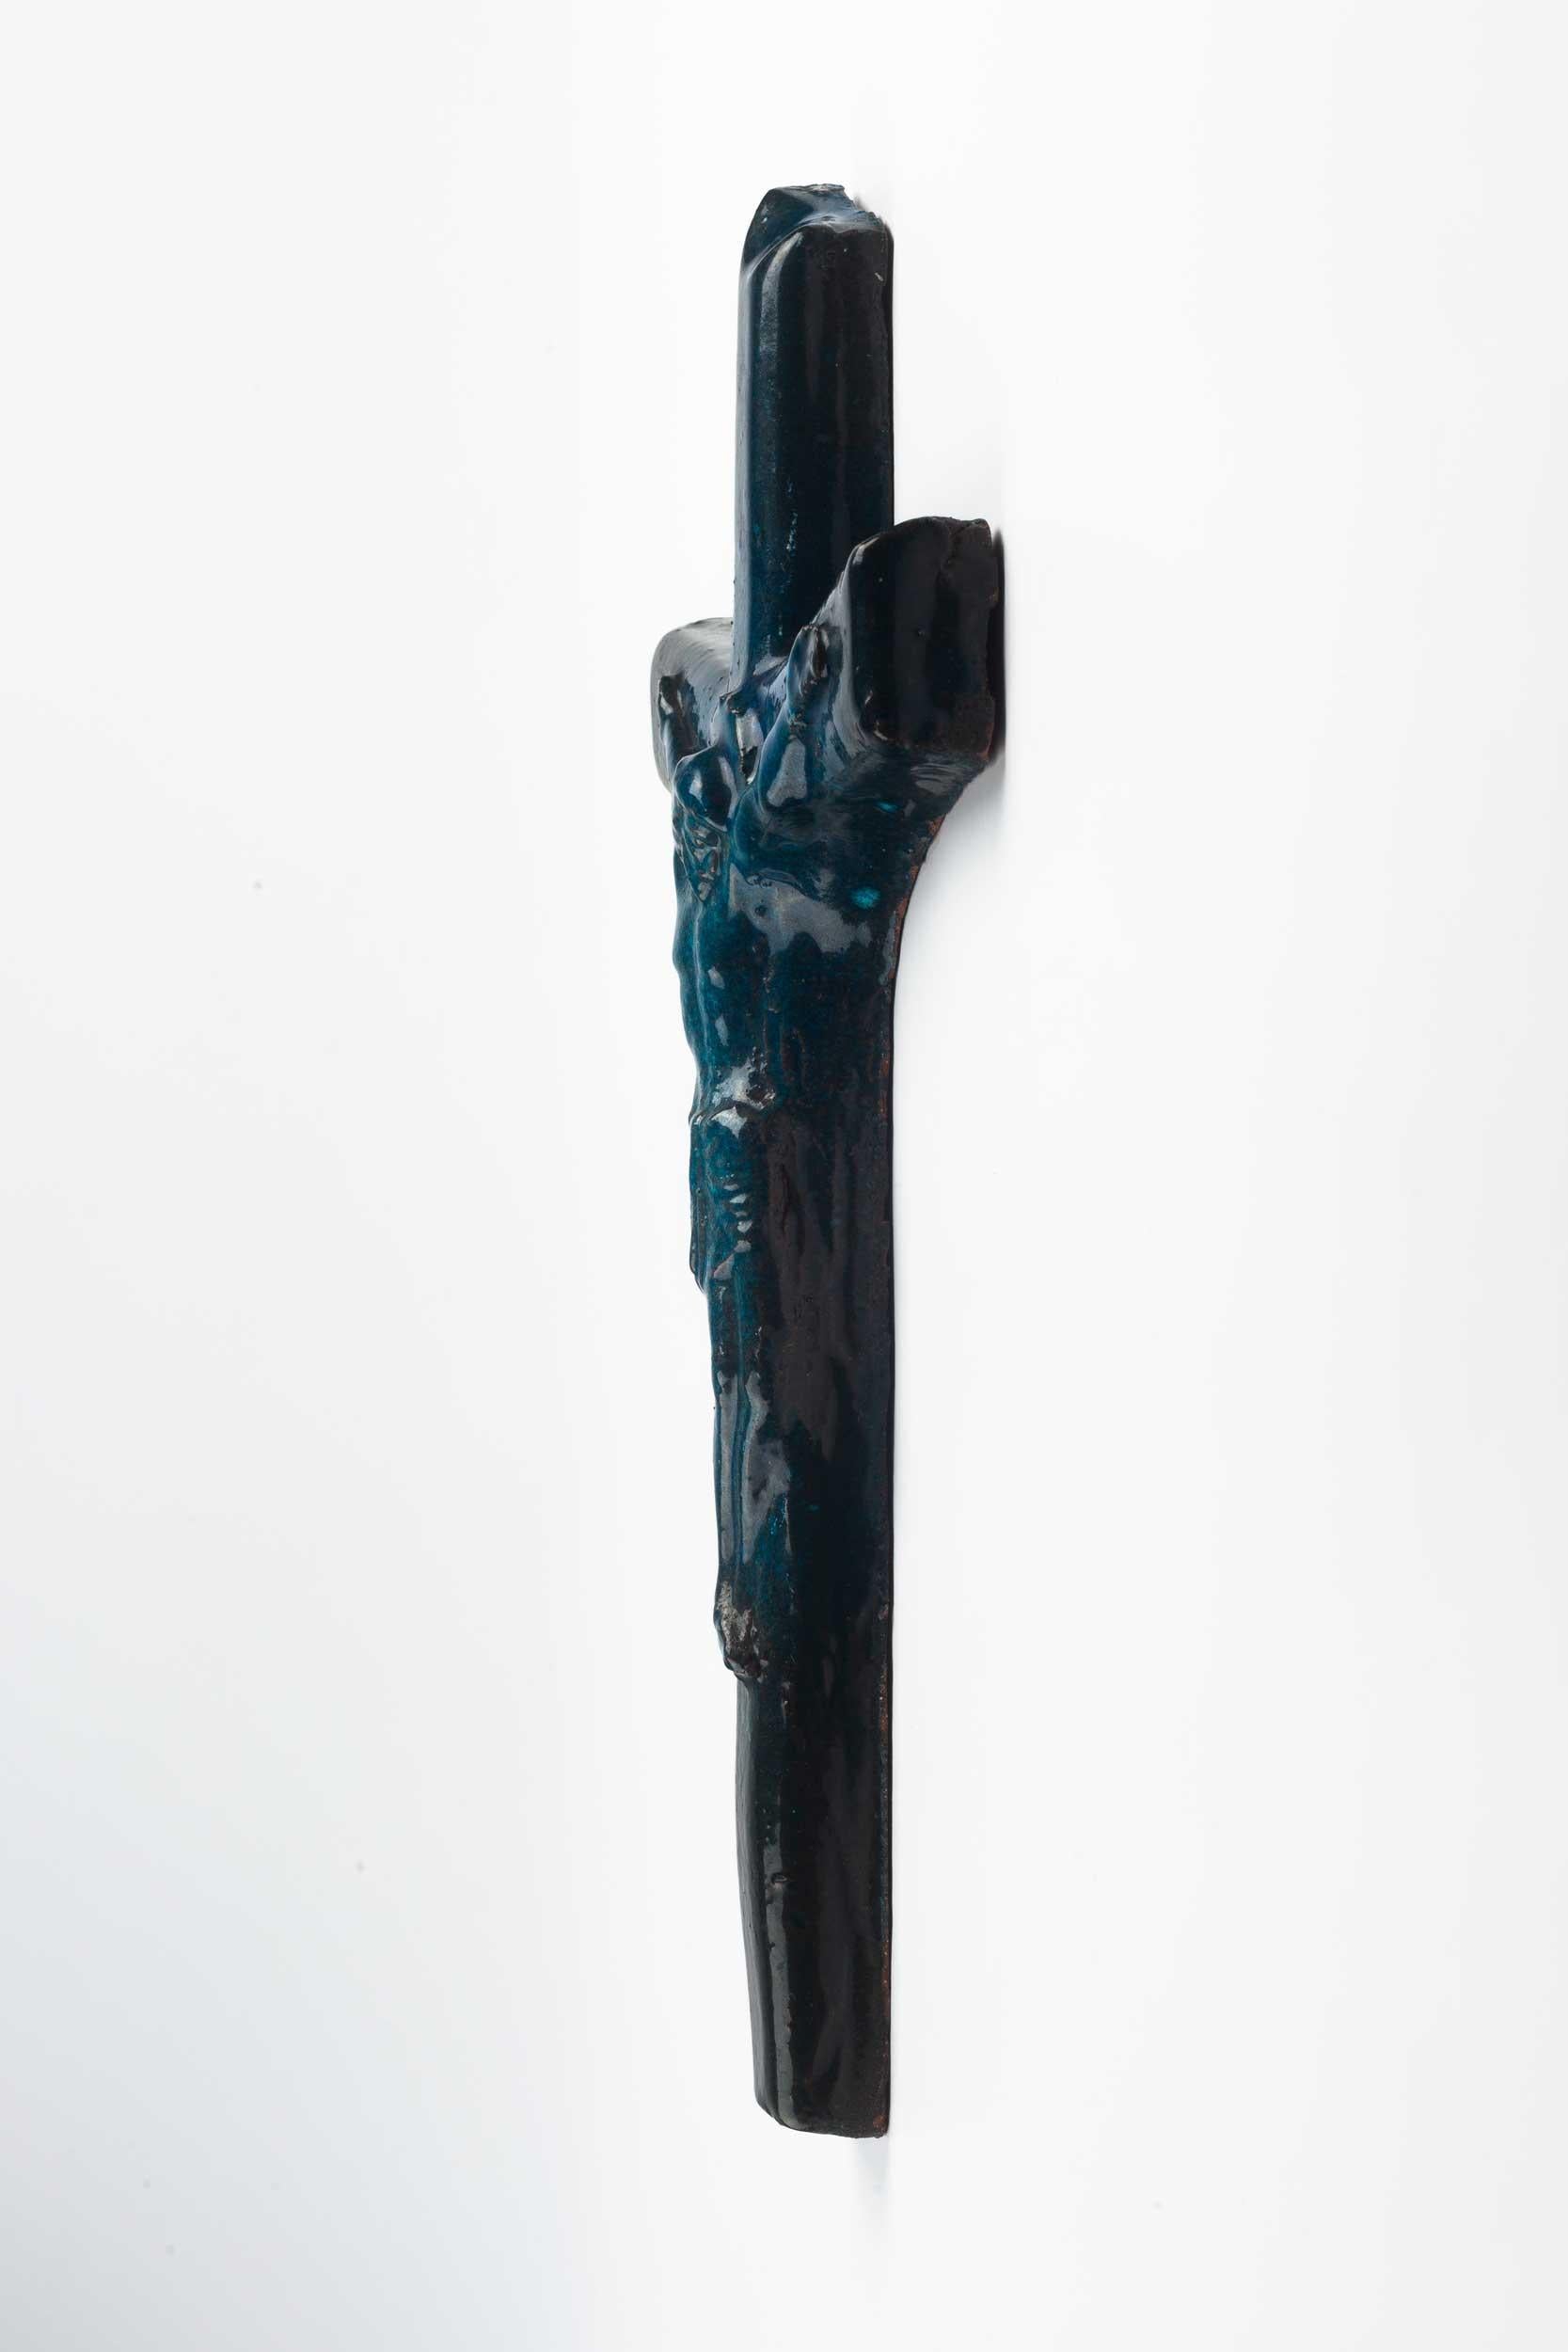 Hand-Crafted Midcentury European Wall Cross, Ceramic, Blue, Black, 1960s For Sale